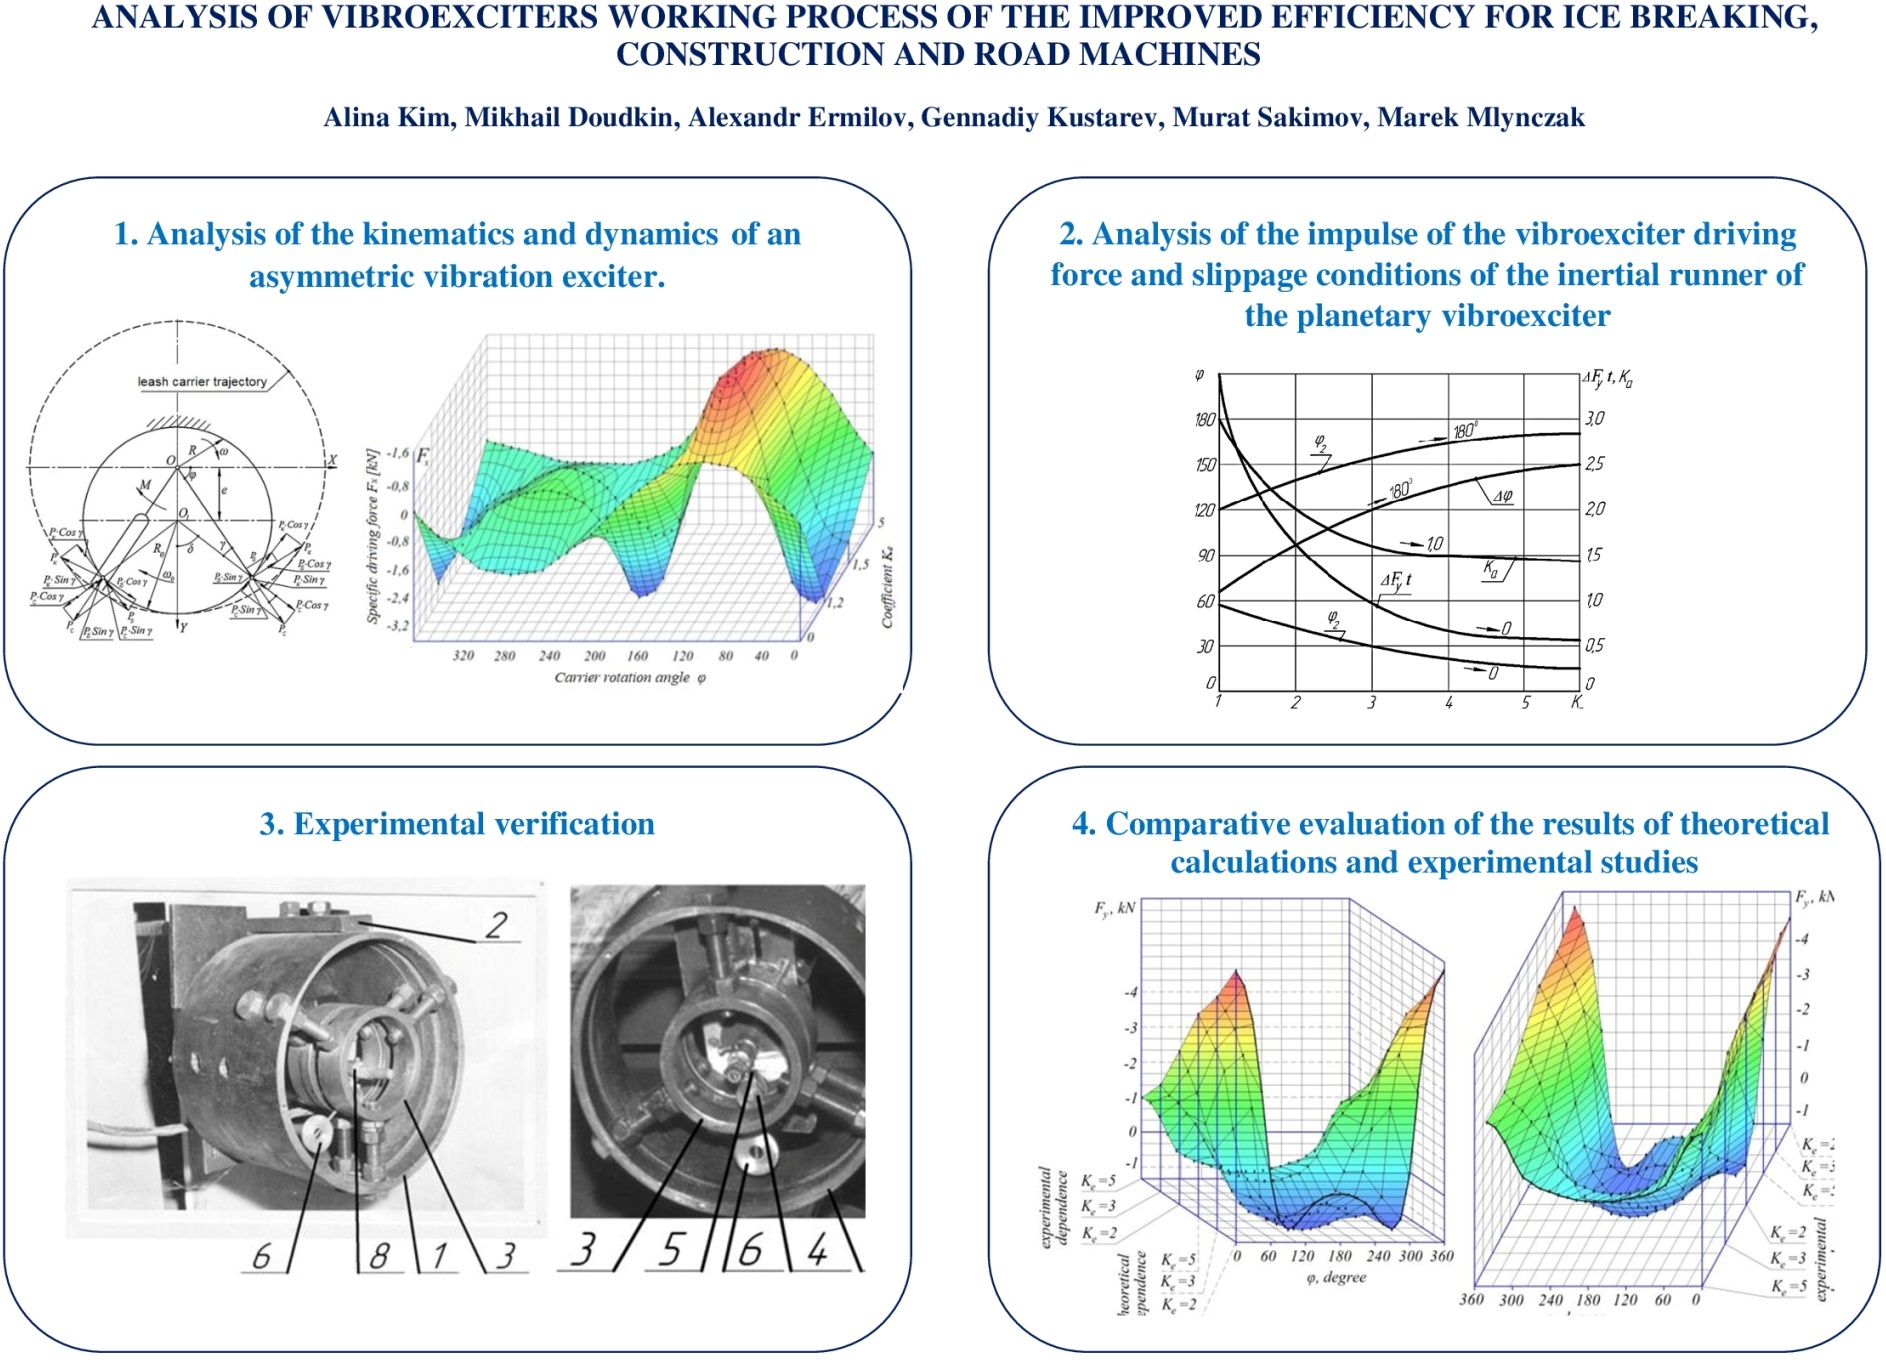 Analysis of vibroexciters working process of the improved efficiency for ice breaking, construction and road machines